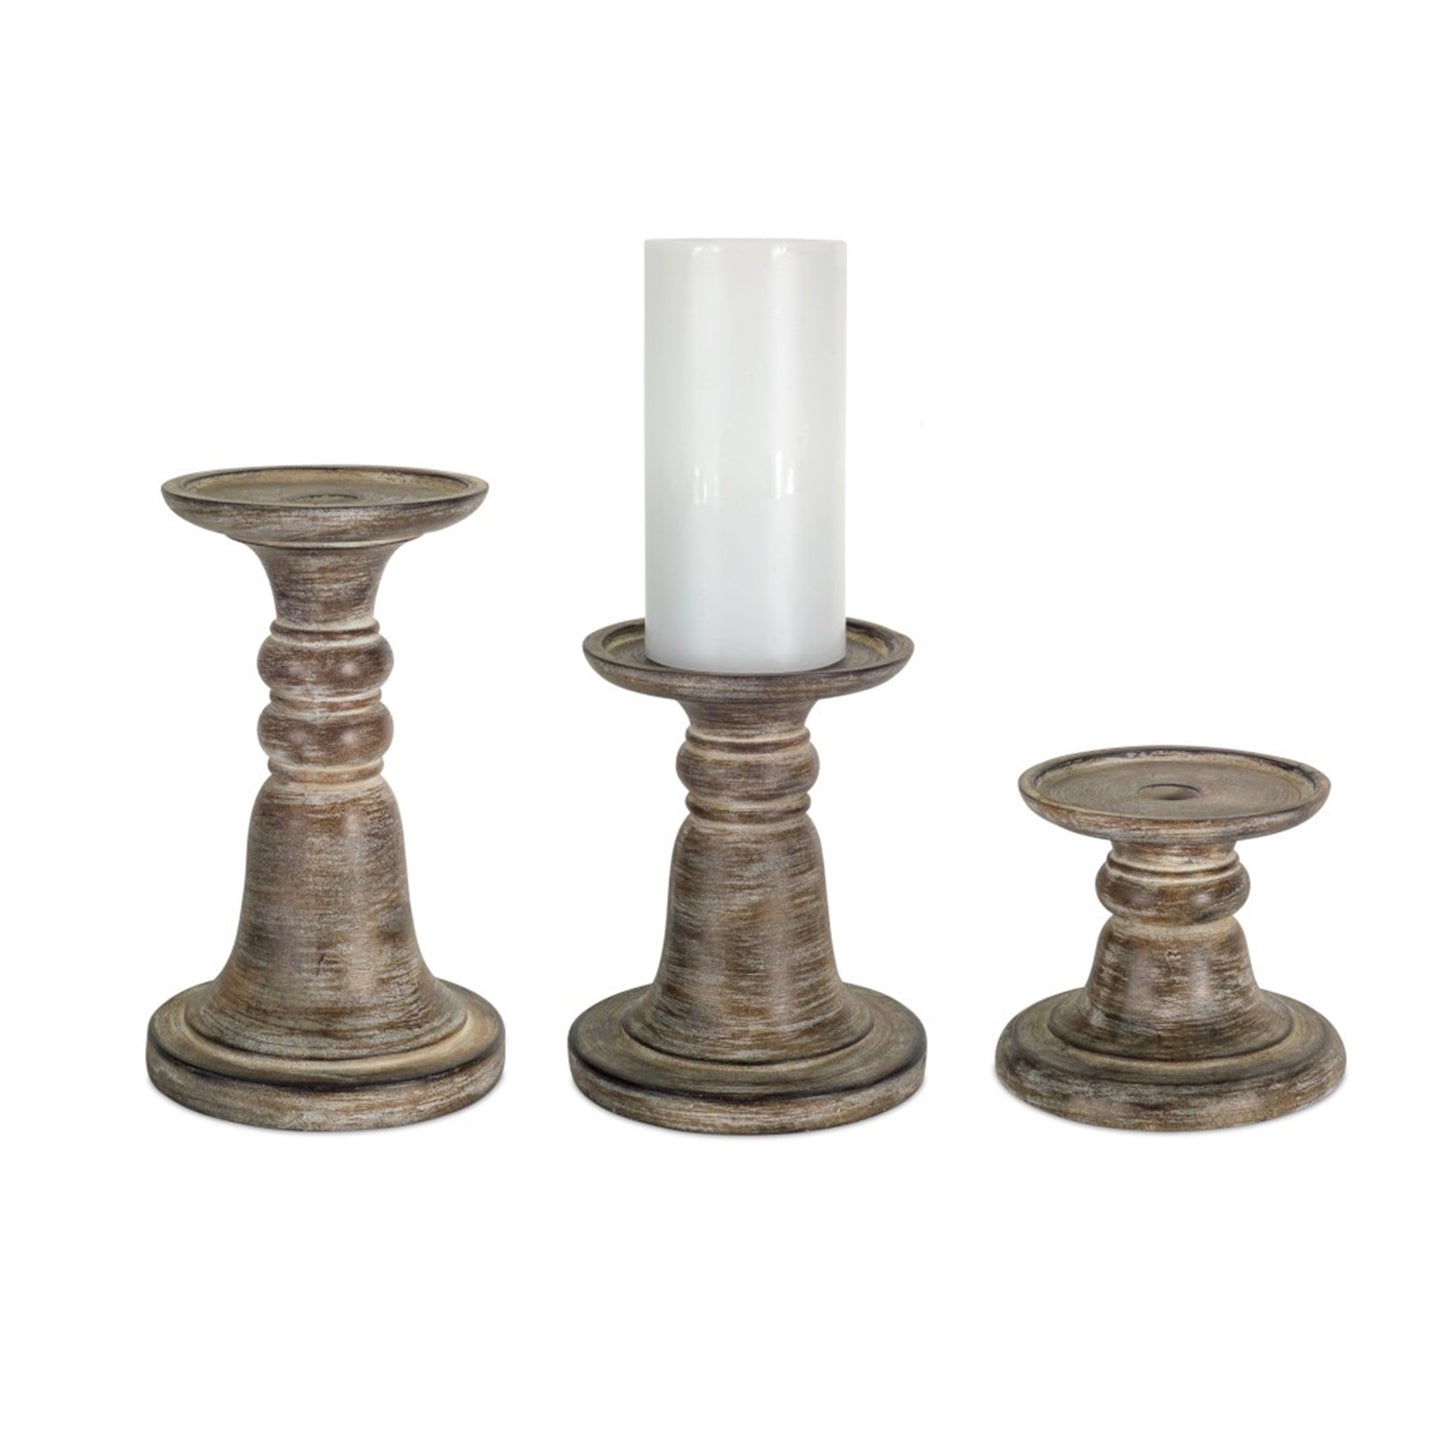 Three Rustic Candle Holders 5", 7", 9.25"